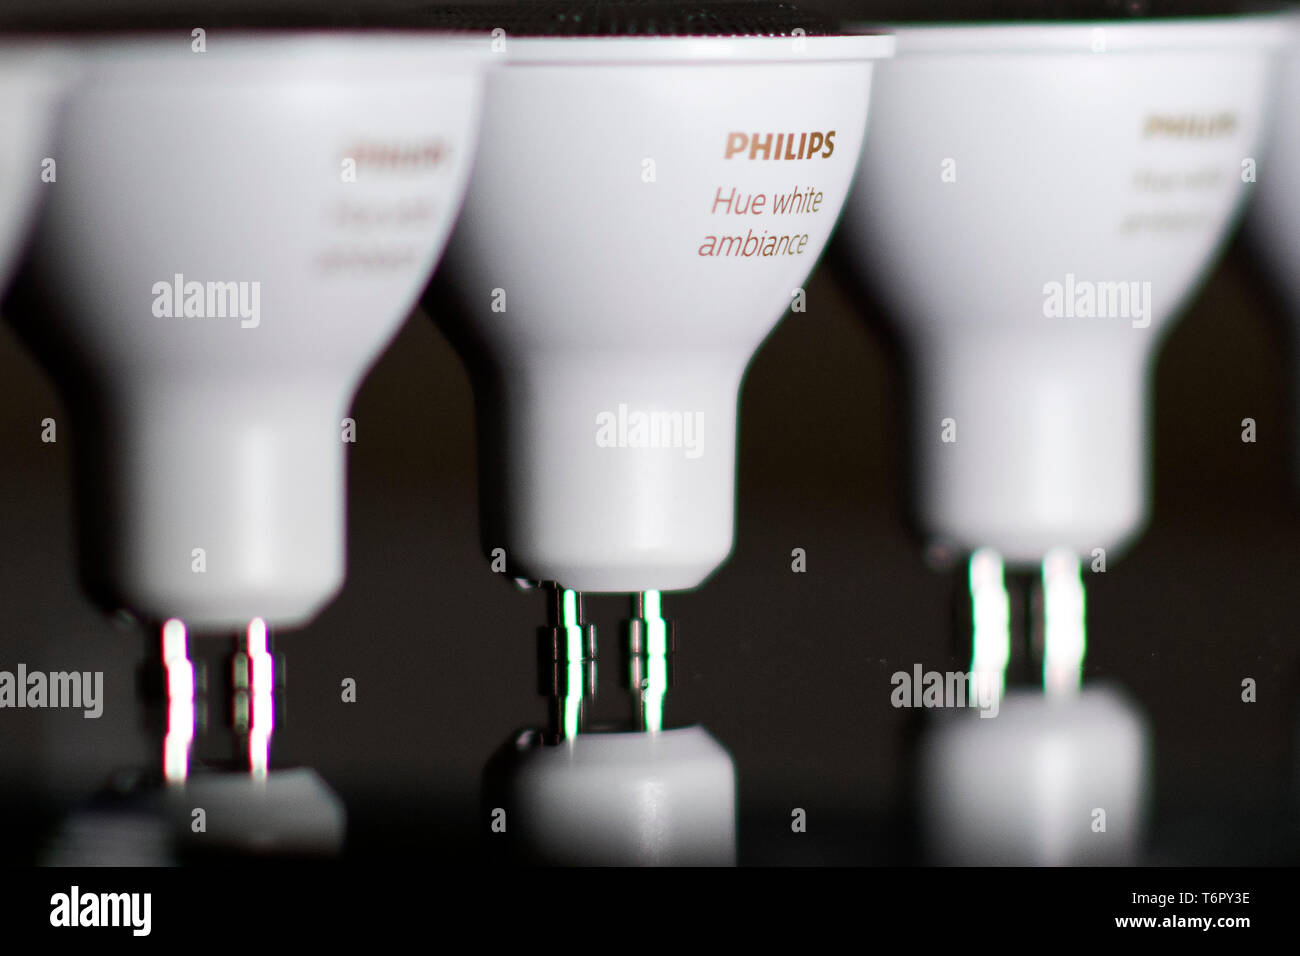 https://c8.alamy.com/comp/T6PY3E/philips-hue-white-ambiance-gu10-light-bulbs-pictured-in-london-may-1-2019-the-led-bulbs-are-modern-smartphone-voice-activated-technology-T6PY3E.jpg